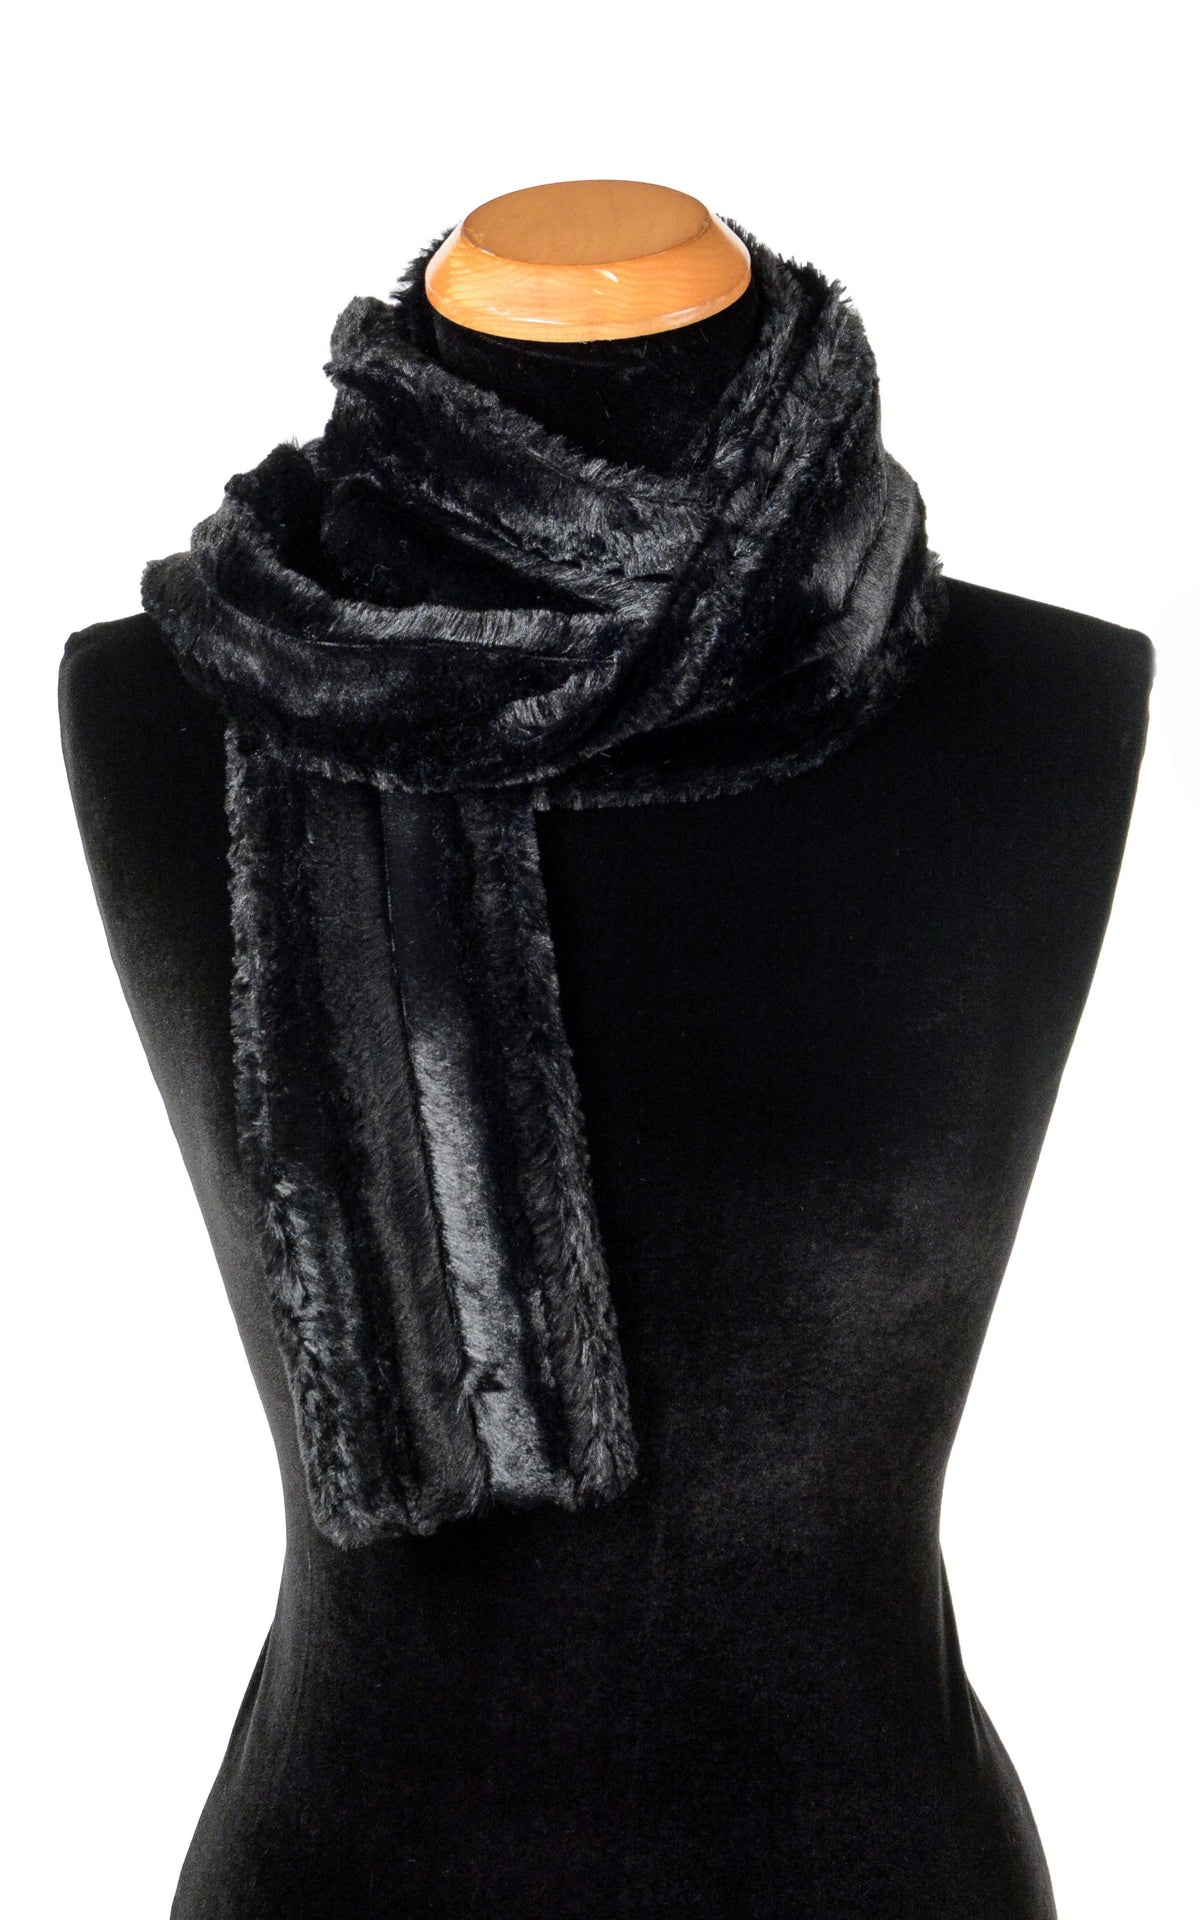 Product shot of Skinny Scarf Minky  Black on mannequin | Cuddly Faux Fur | Handmade in Seattle WA Pandemonium Millinery